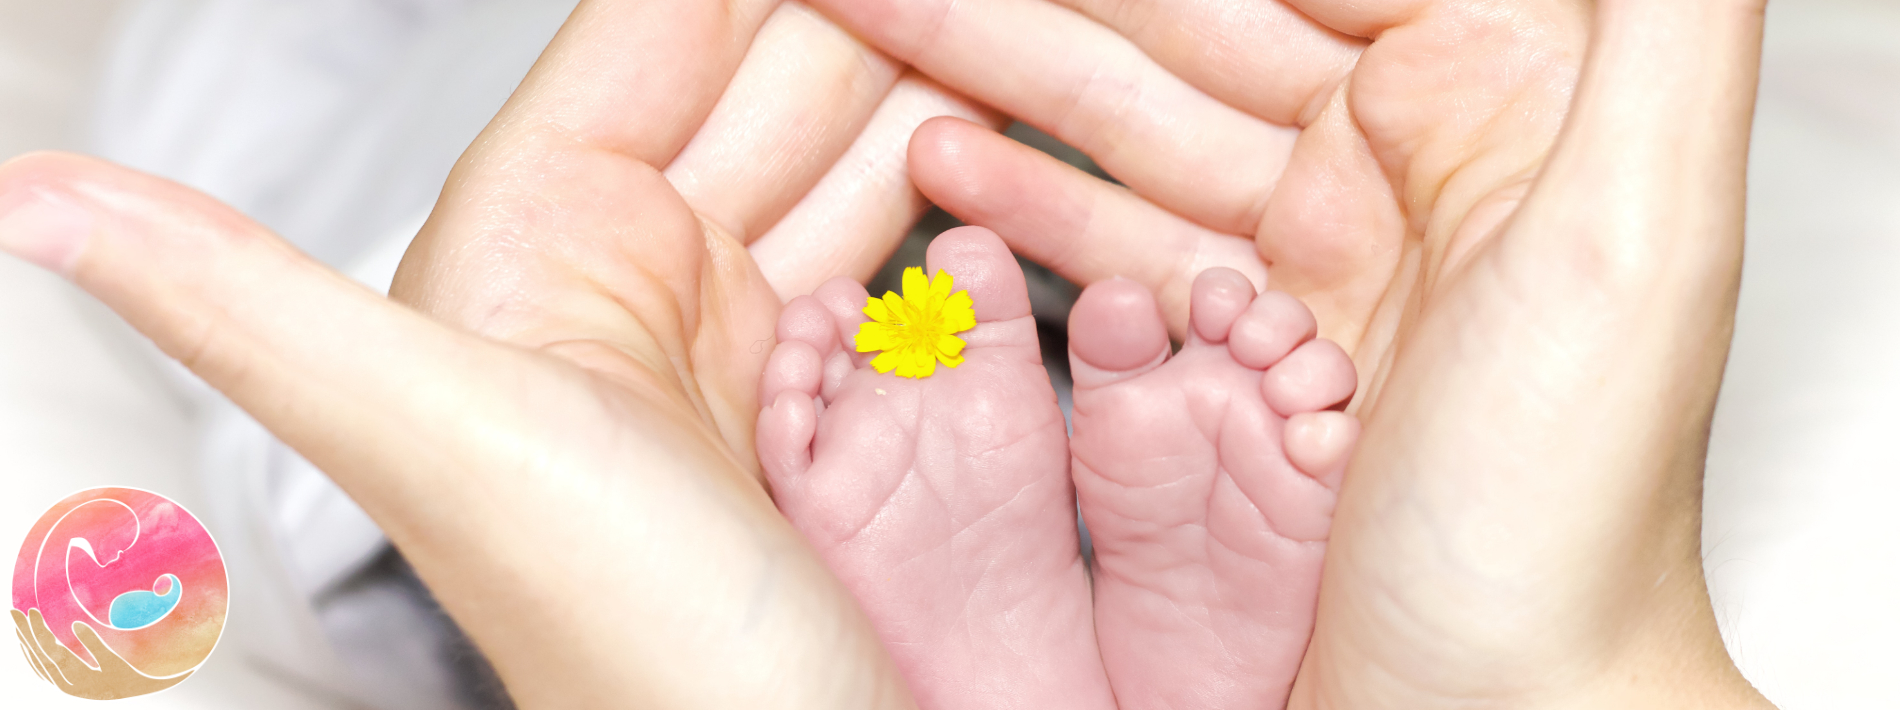 Woman's hands holding babies feet with flower in between the toes. We Do Birth Doula Services of Wilmington North Carolina logo on the bottom left of picture.